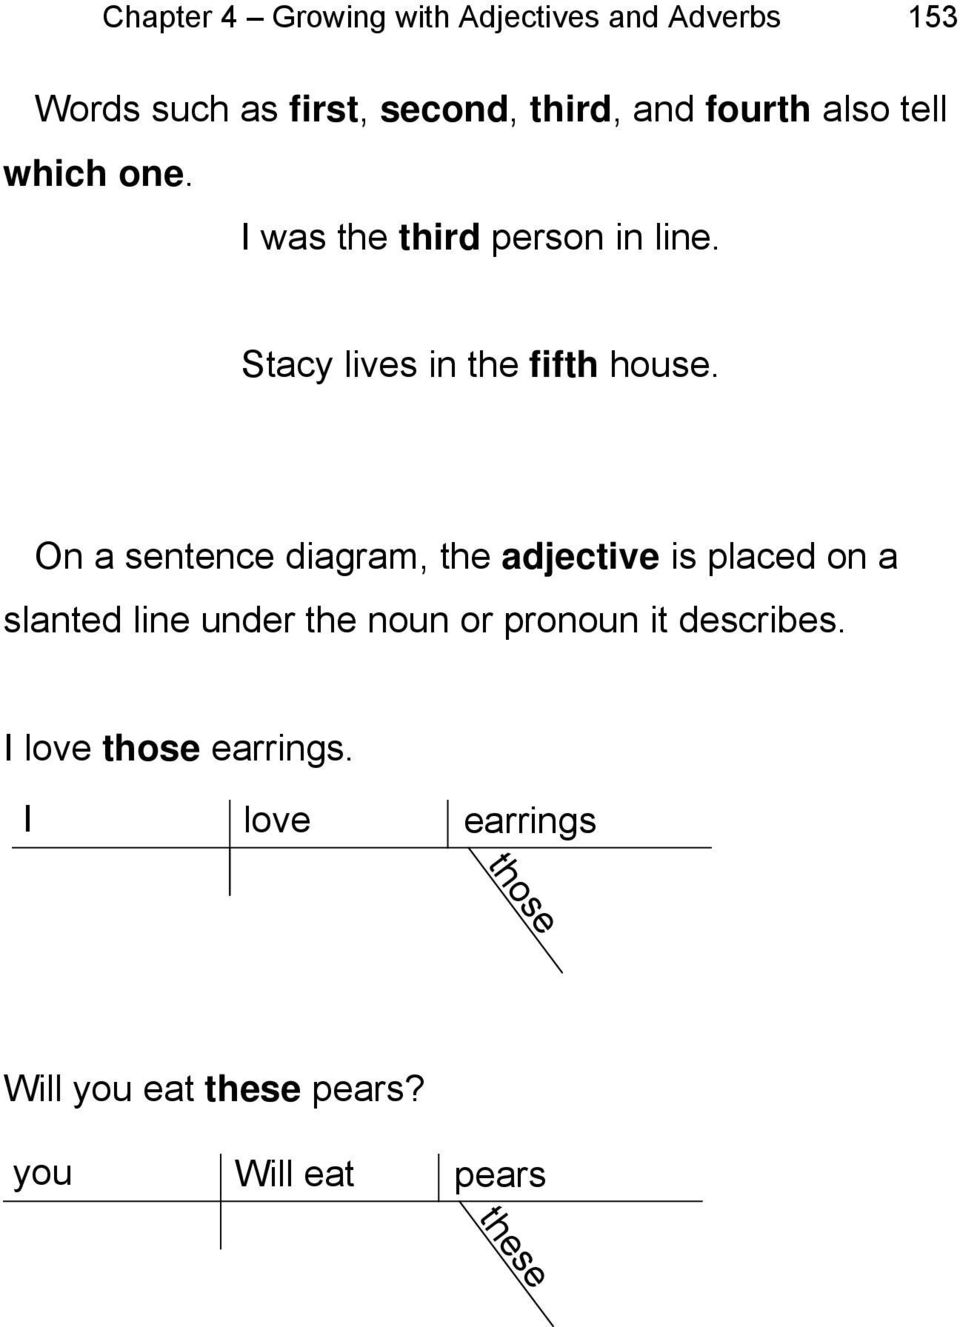 On a sentence diagram, the adjective is placed on a slanted line under the noun or pronoun it